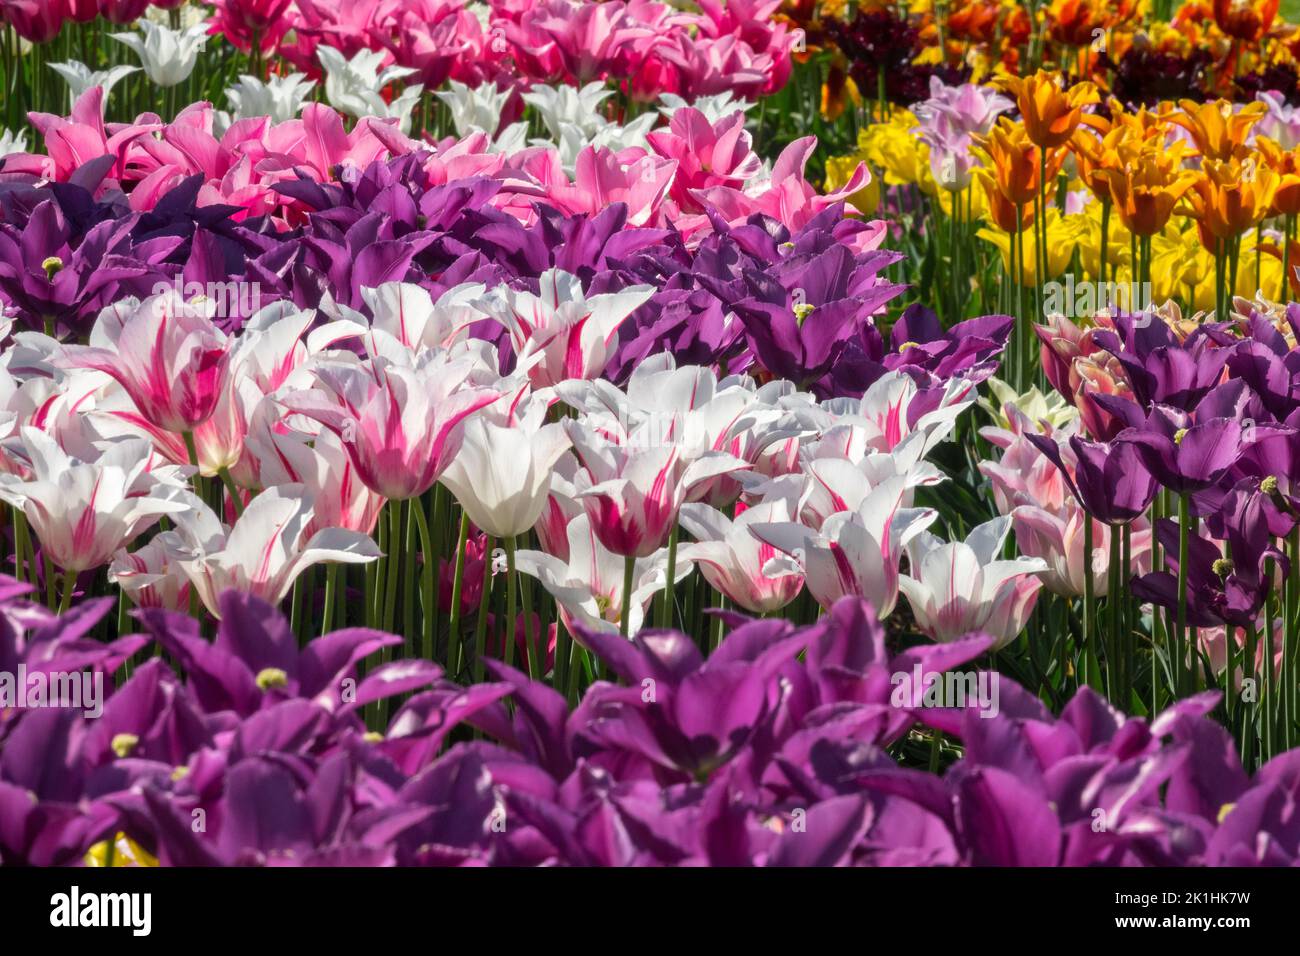 Pink purple flowers spring tulips in flower bed colourful Stock Photo